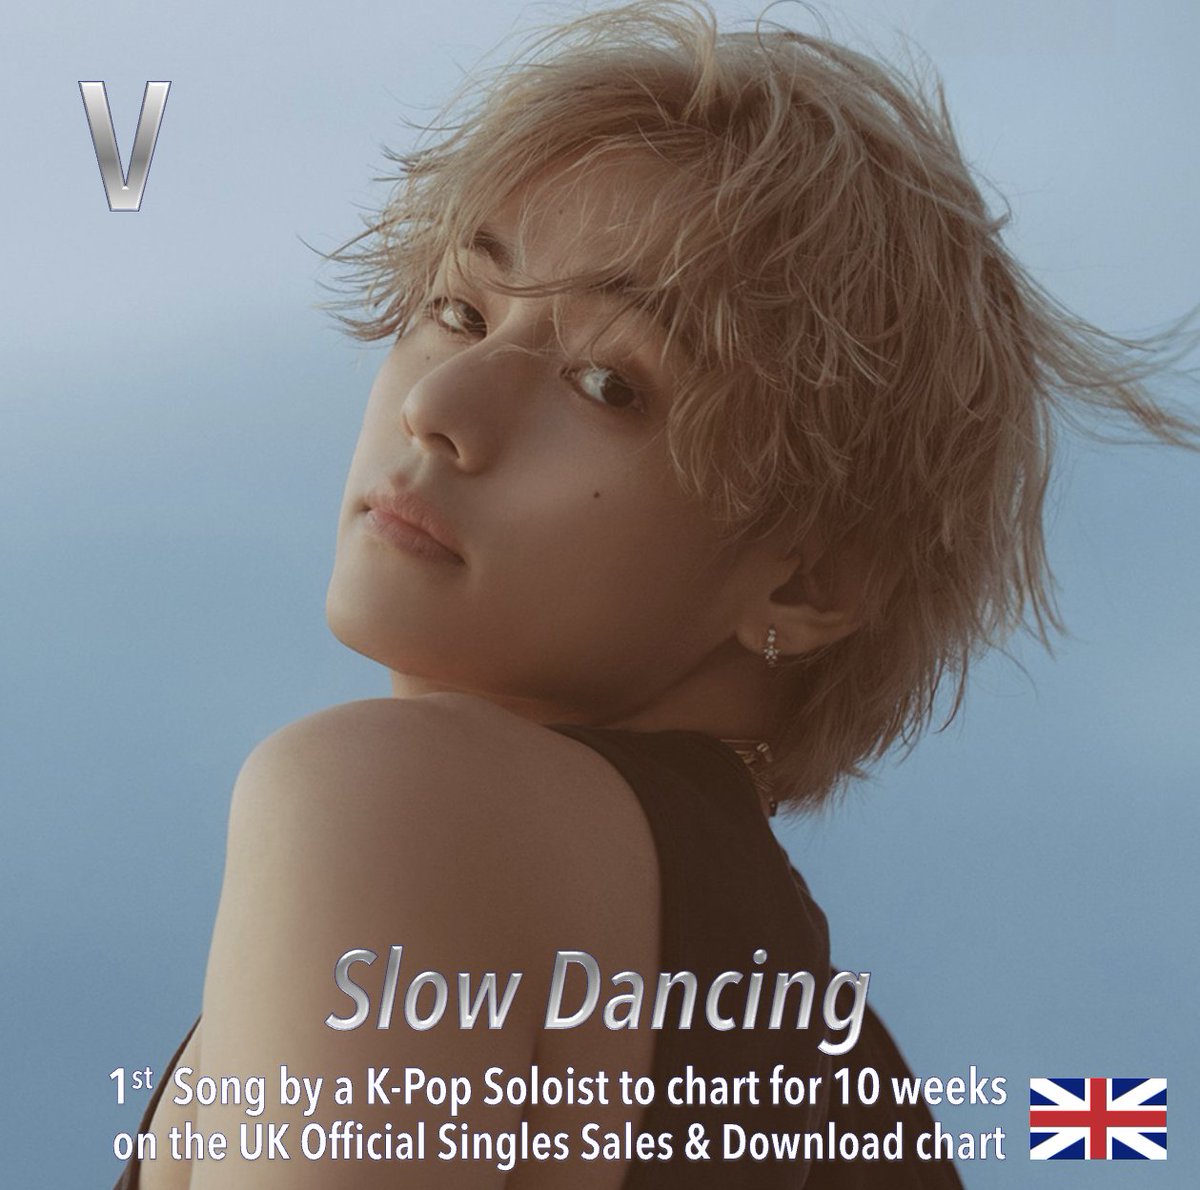 #V's #SlowDancing becomes the 1st Song by a Kpop Soloist to chart 10 weeks on UK Official Singles Sales & Download chart! 💪🕺🥇🇰🇷👨‍🎤🎶📈✖️🔟🗓️🇬🇧💰📈🔥👑💜